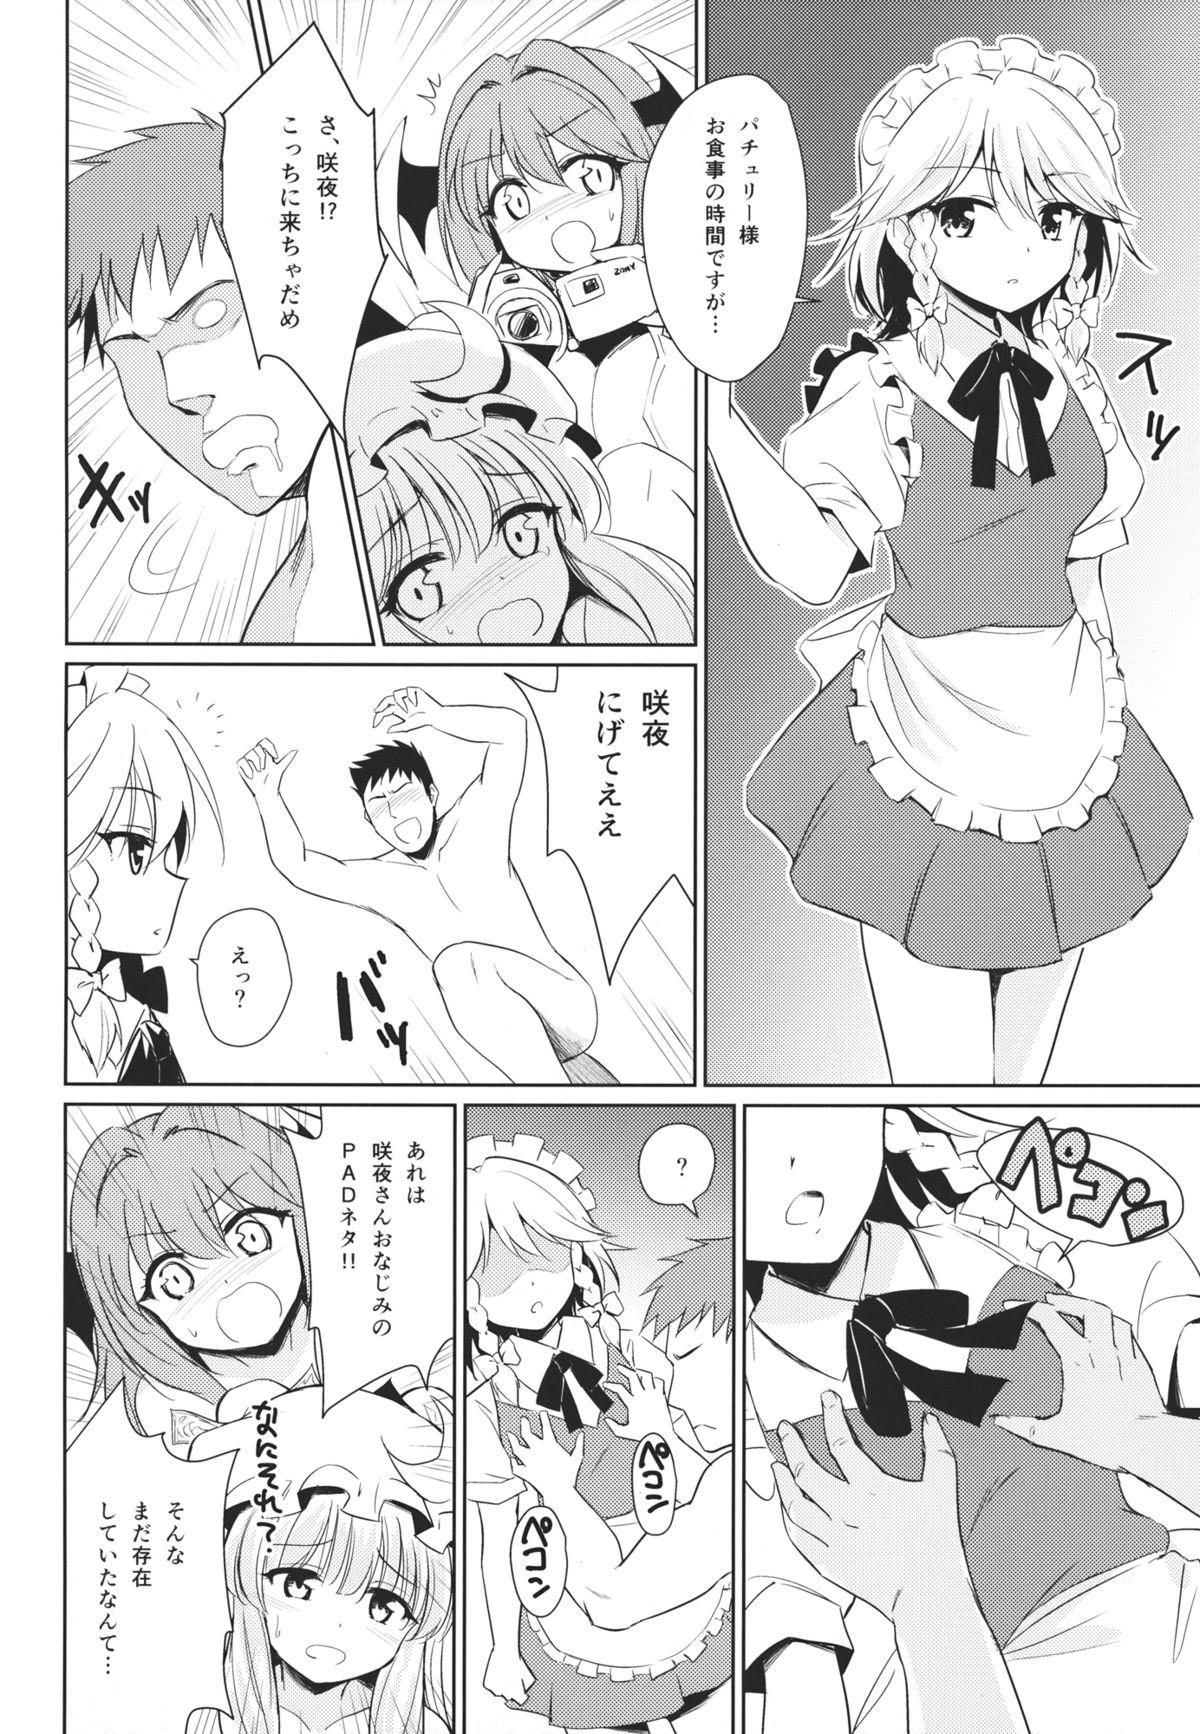 Pussy Orgasm Patchouli no Itsumo no Koto - Touhou project Nude - Page 27